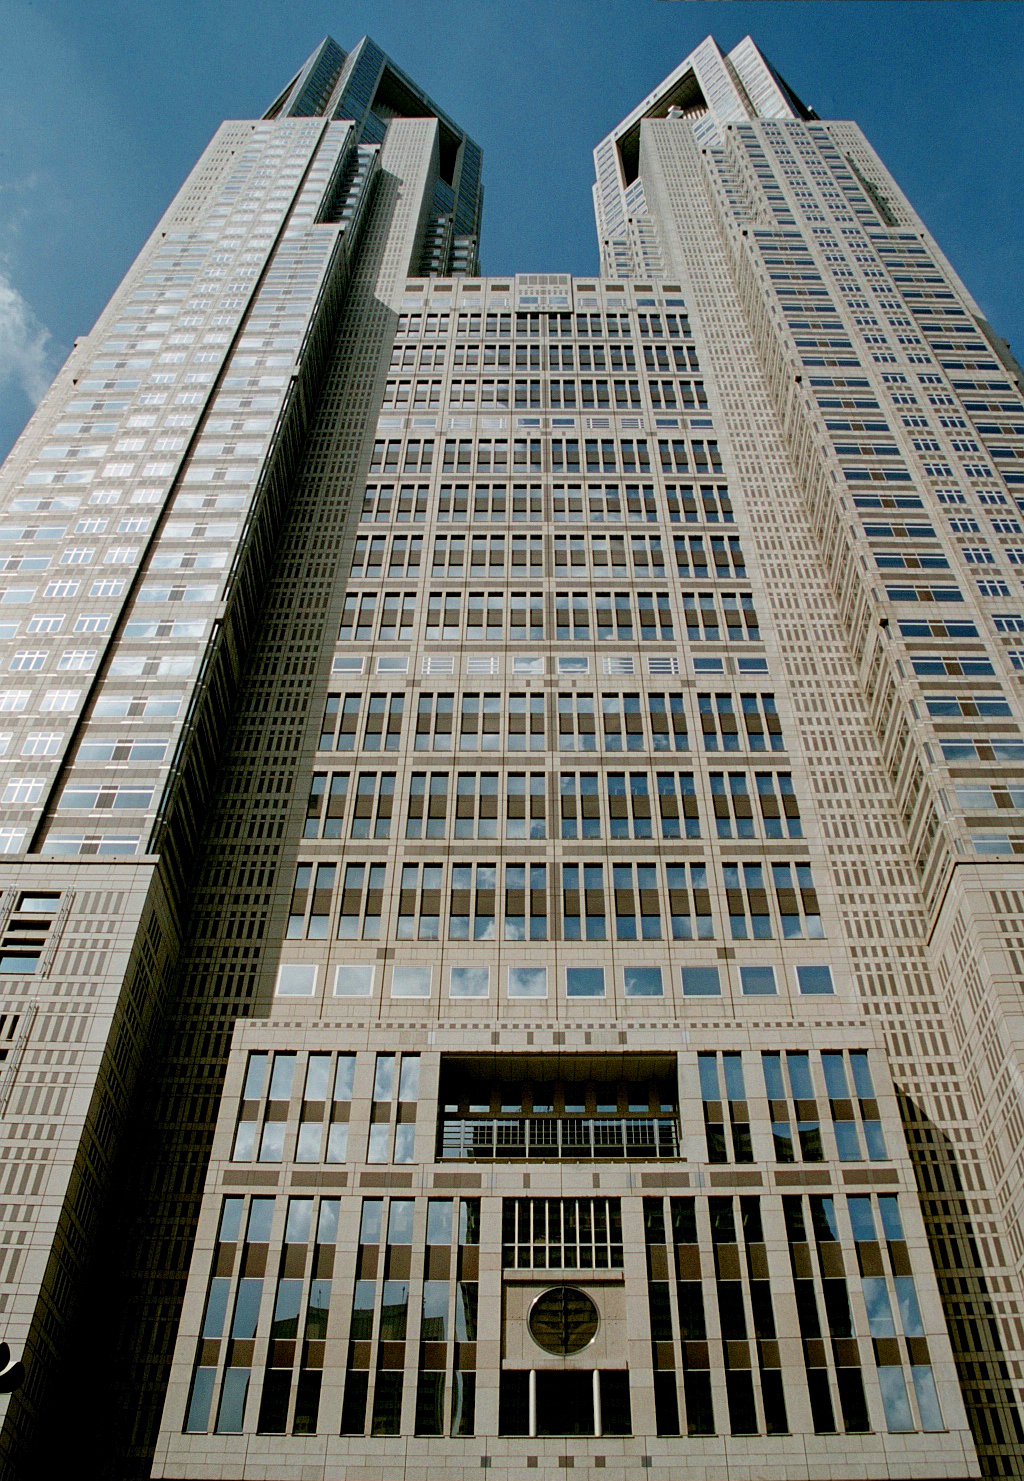 Tokyo Metropolitan Government Building, Tokyo - View from the east. © Mathias Beinling